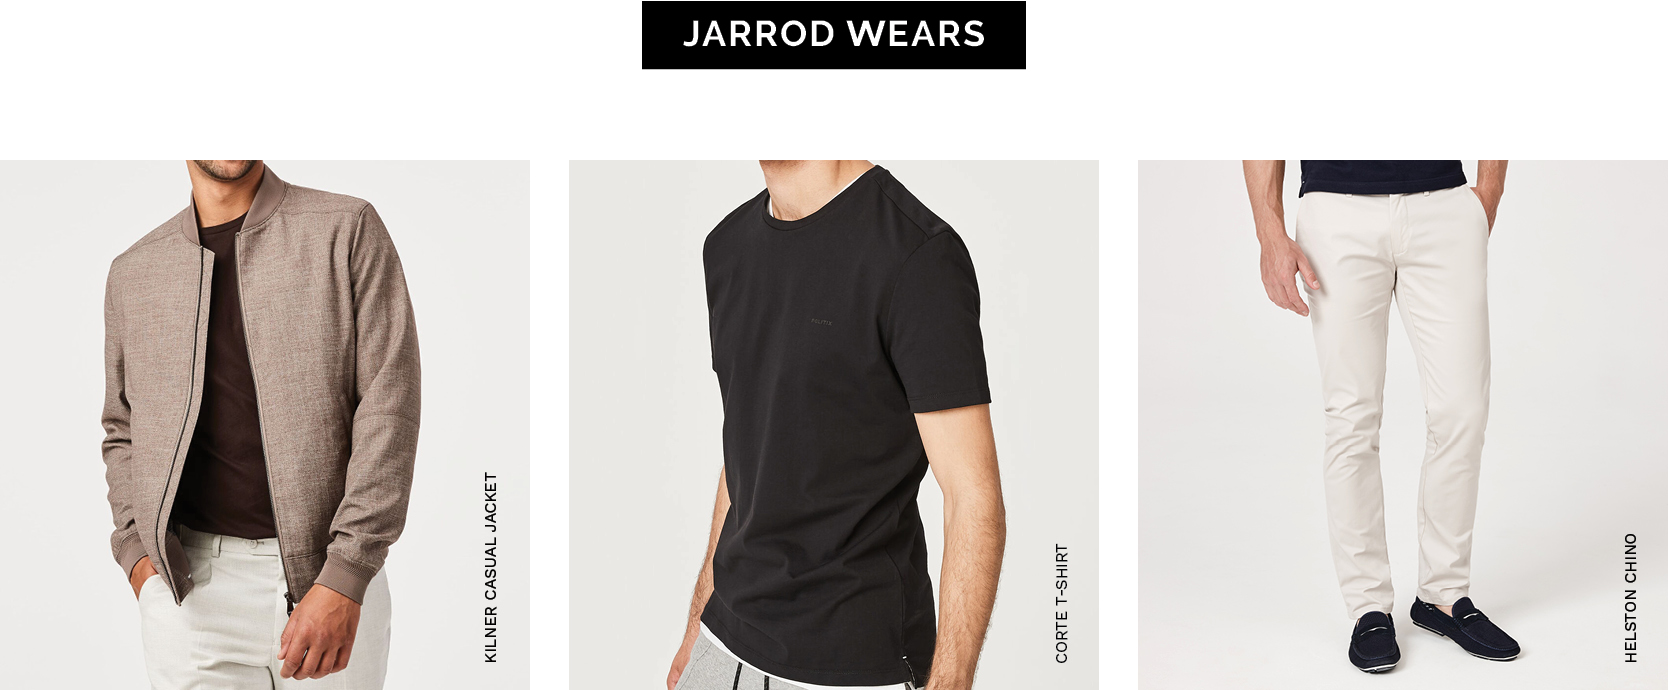 Jarrod Wears featuring images of tan bomber jacket, black t shirt and cream chinos